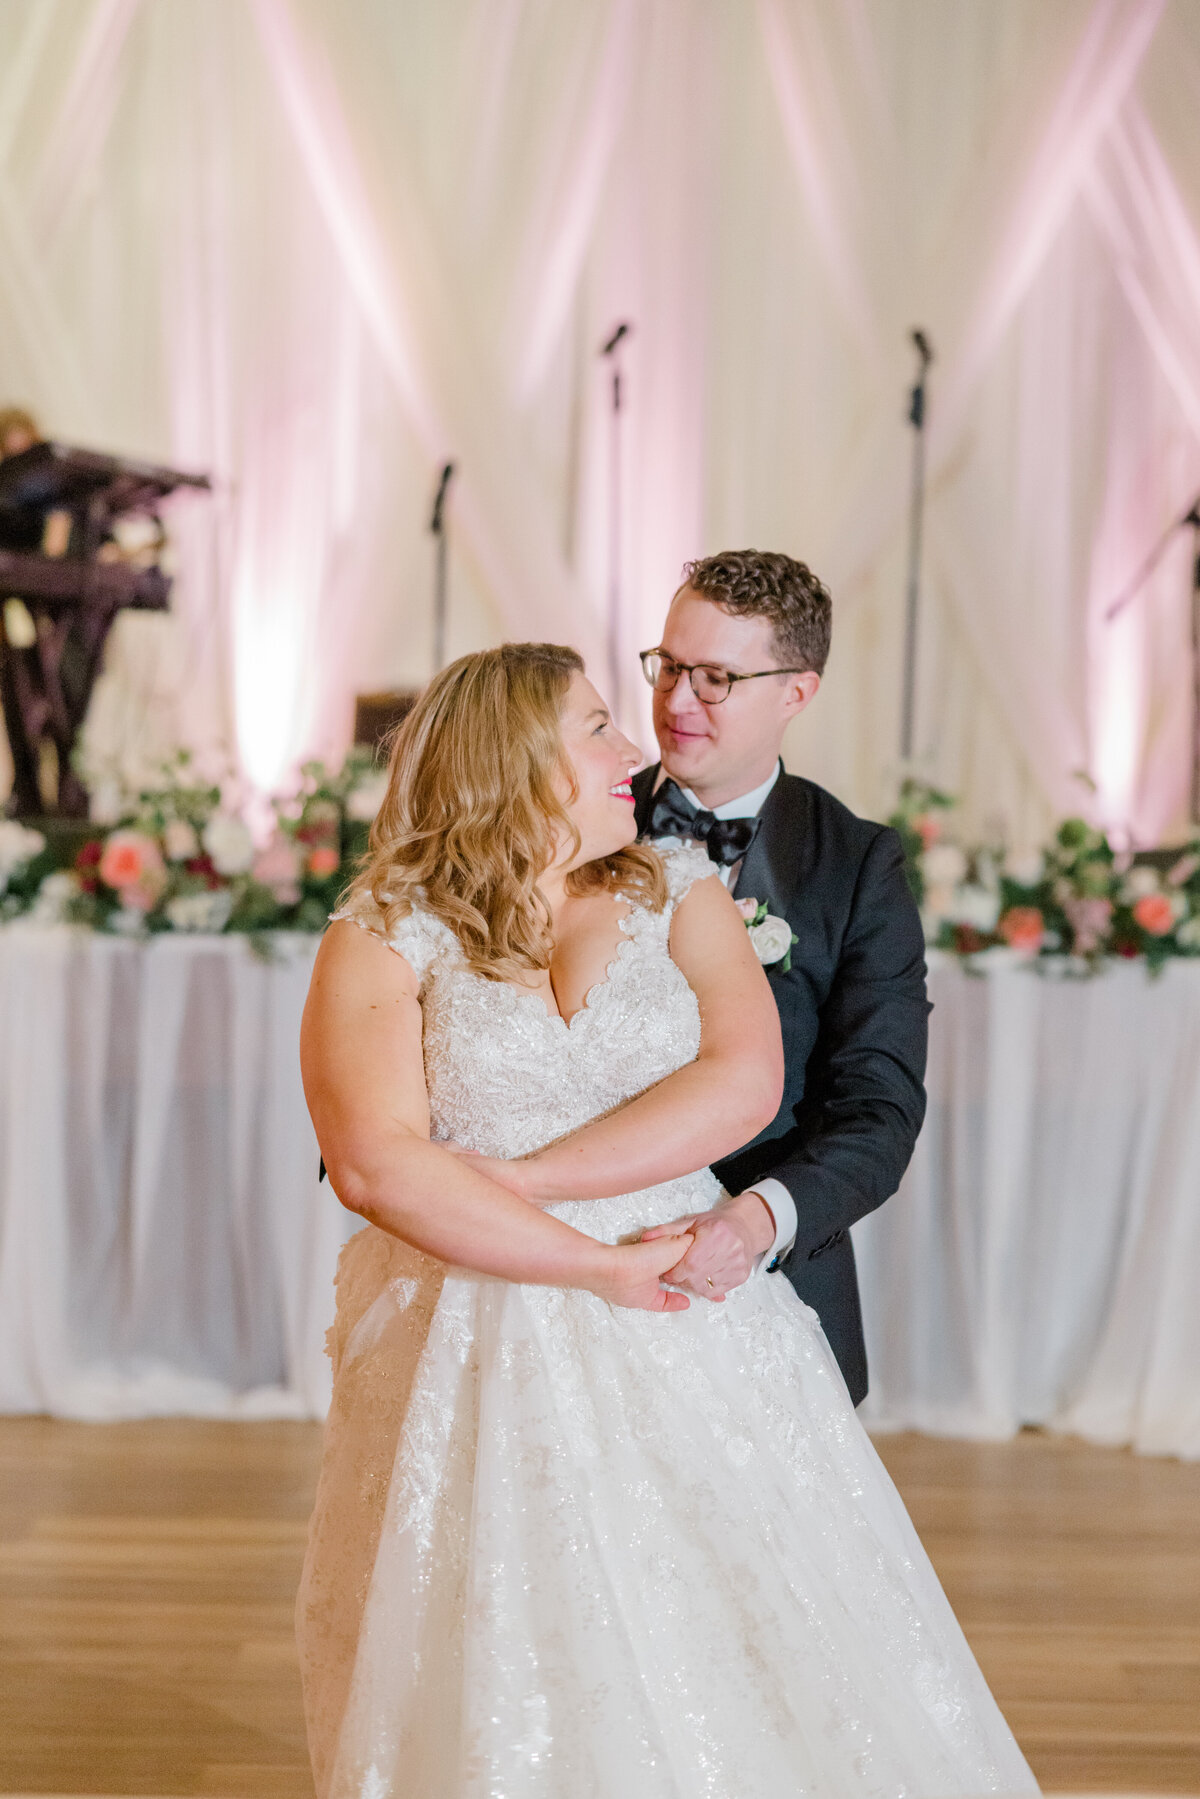 New-England-winter-wedding-charm-with-inviting-ambiance-uplighting-pops-of-pink